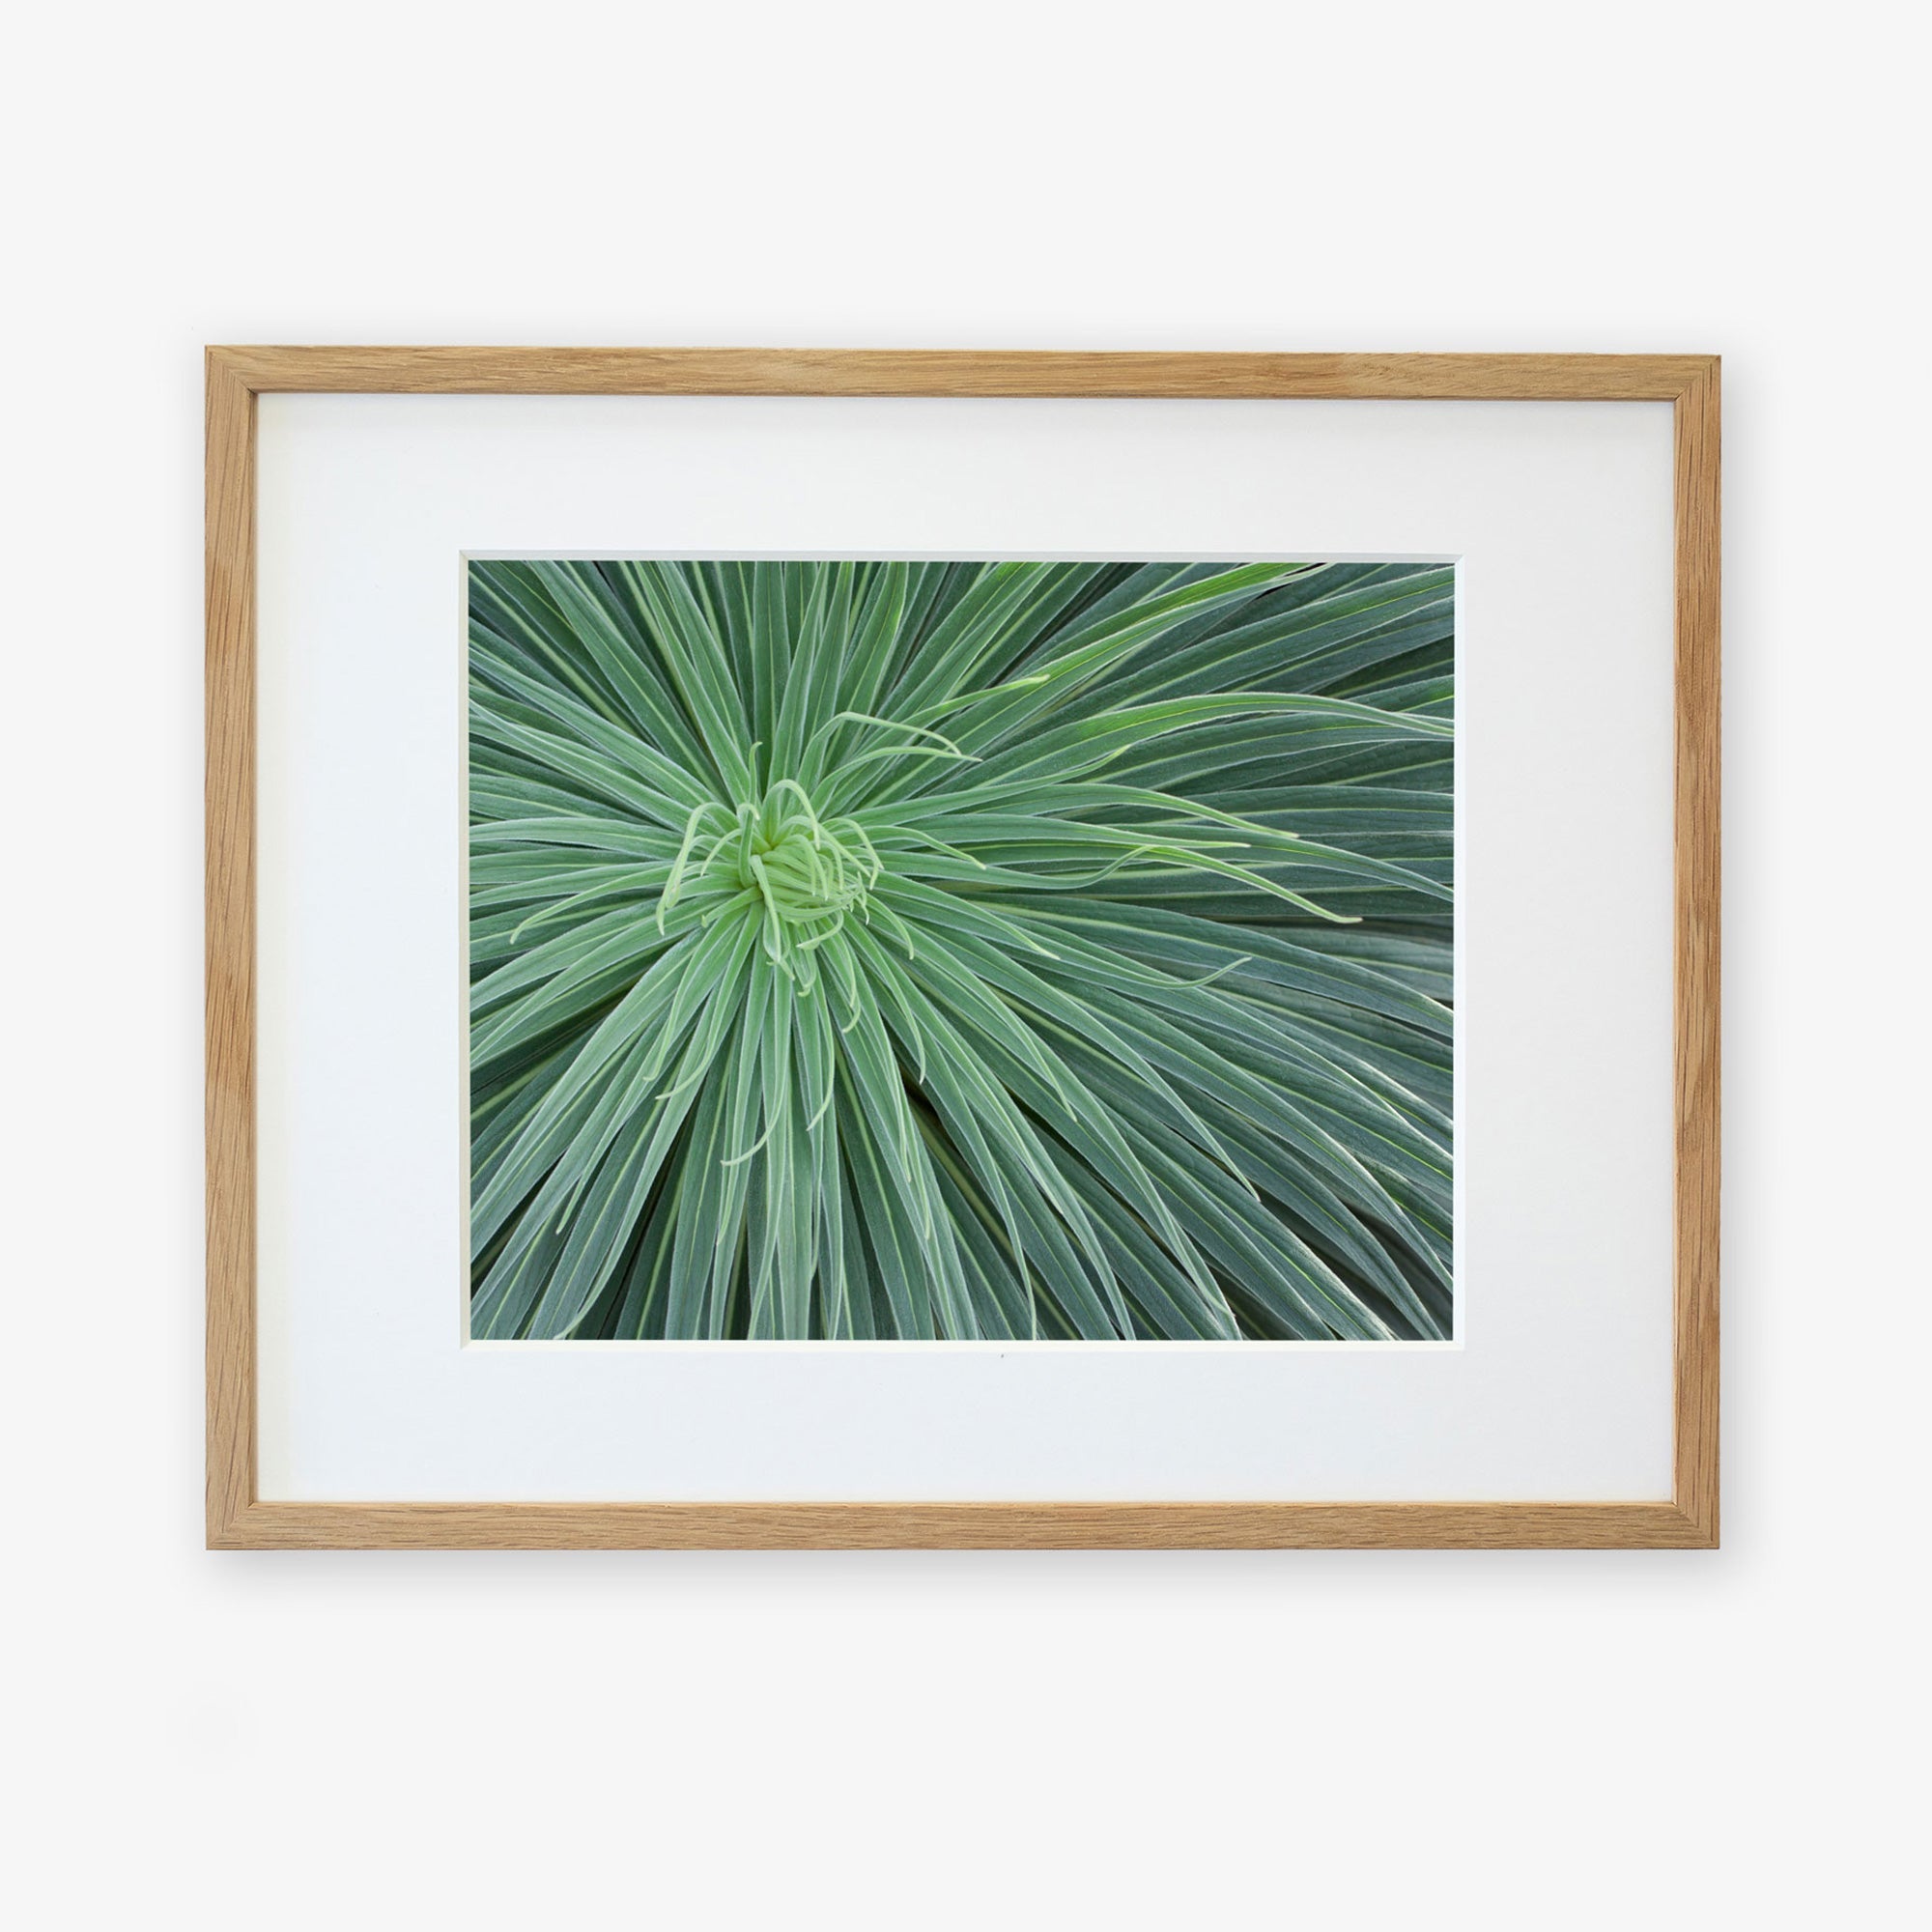 A framed photograph of an Abstract Green Botanical Print, 'Desert Fireworks' by Offley Green, showing close-up detail of its spiky leaves radiating from the center, mounted on archival photographic paper within a light wooden frame.